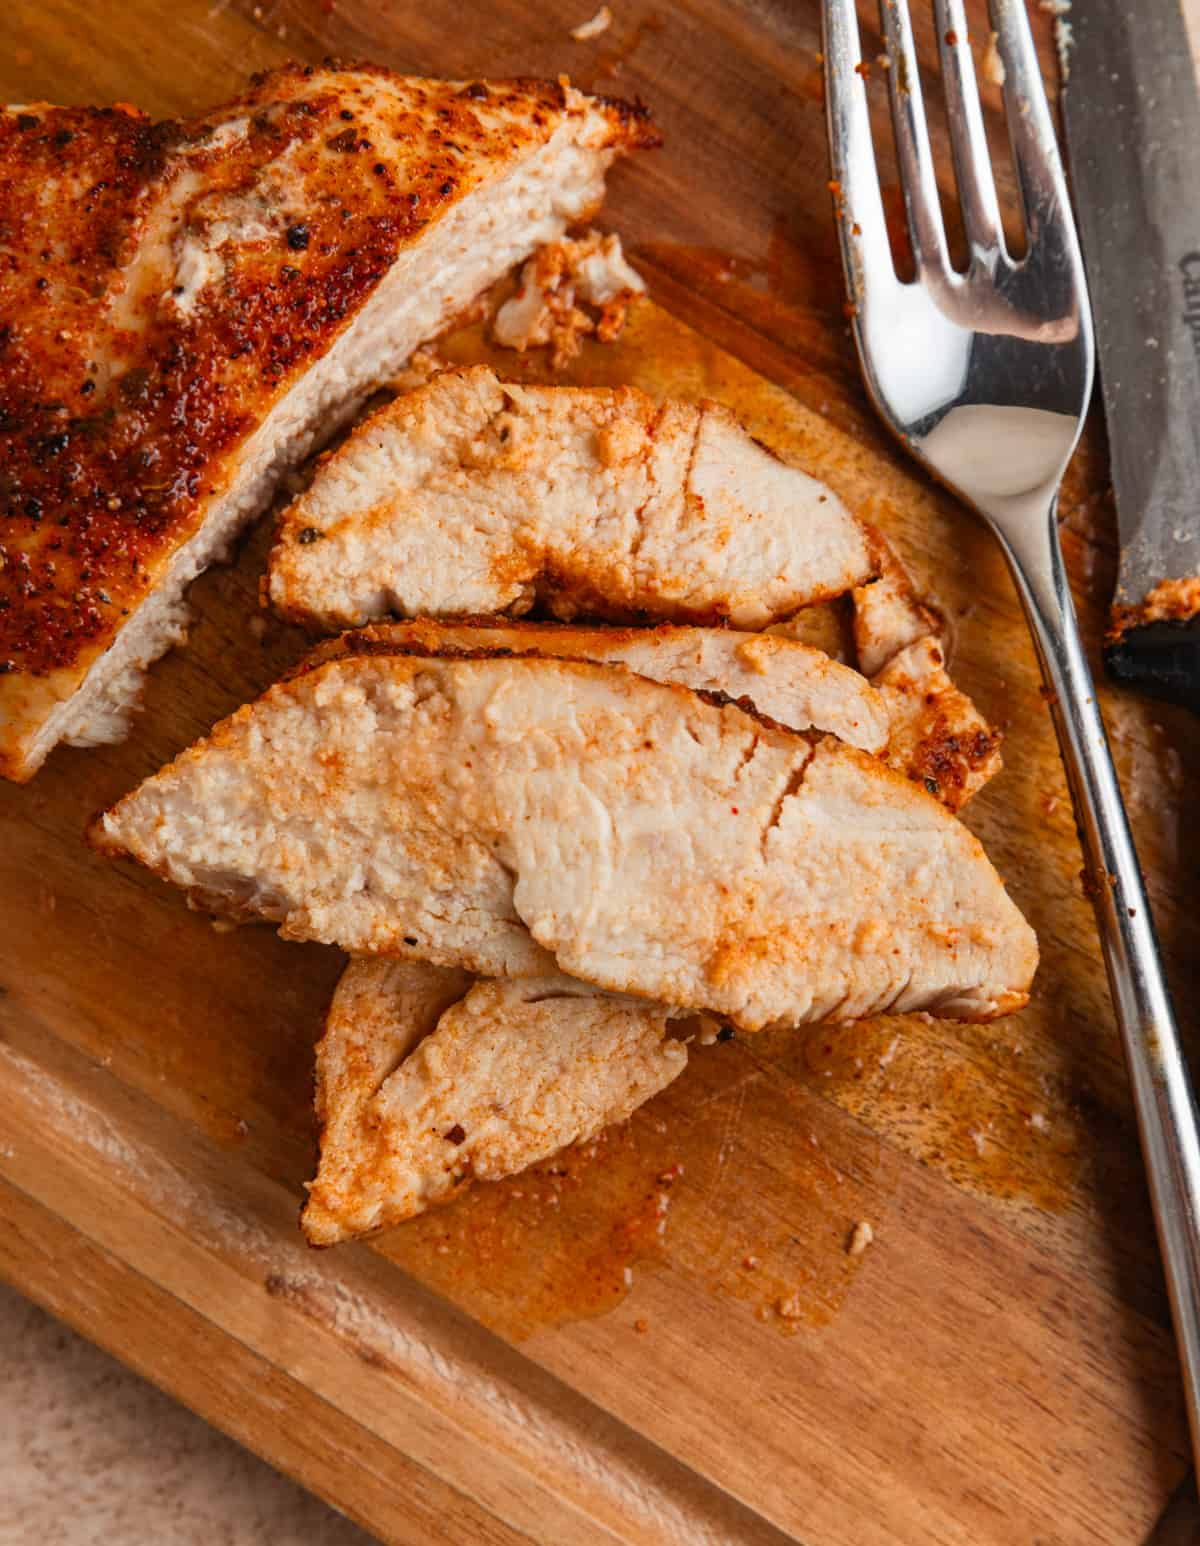 Sliced chicken breast on cutting board with fork and knife.